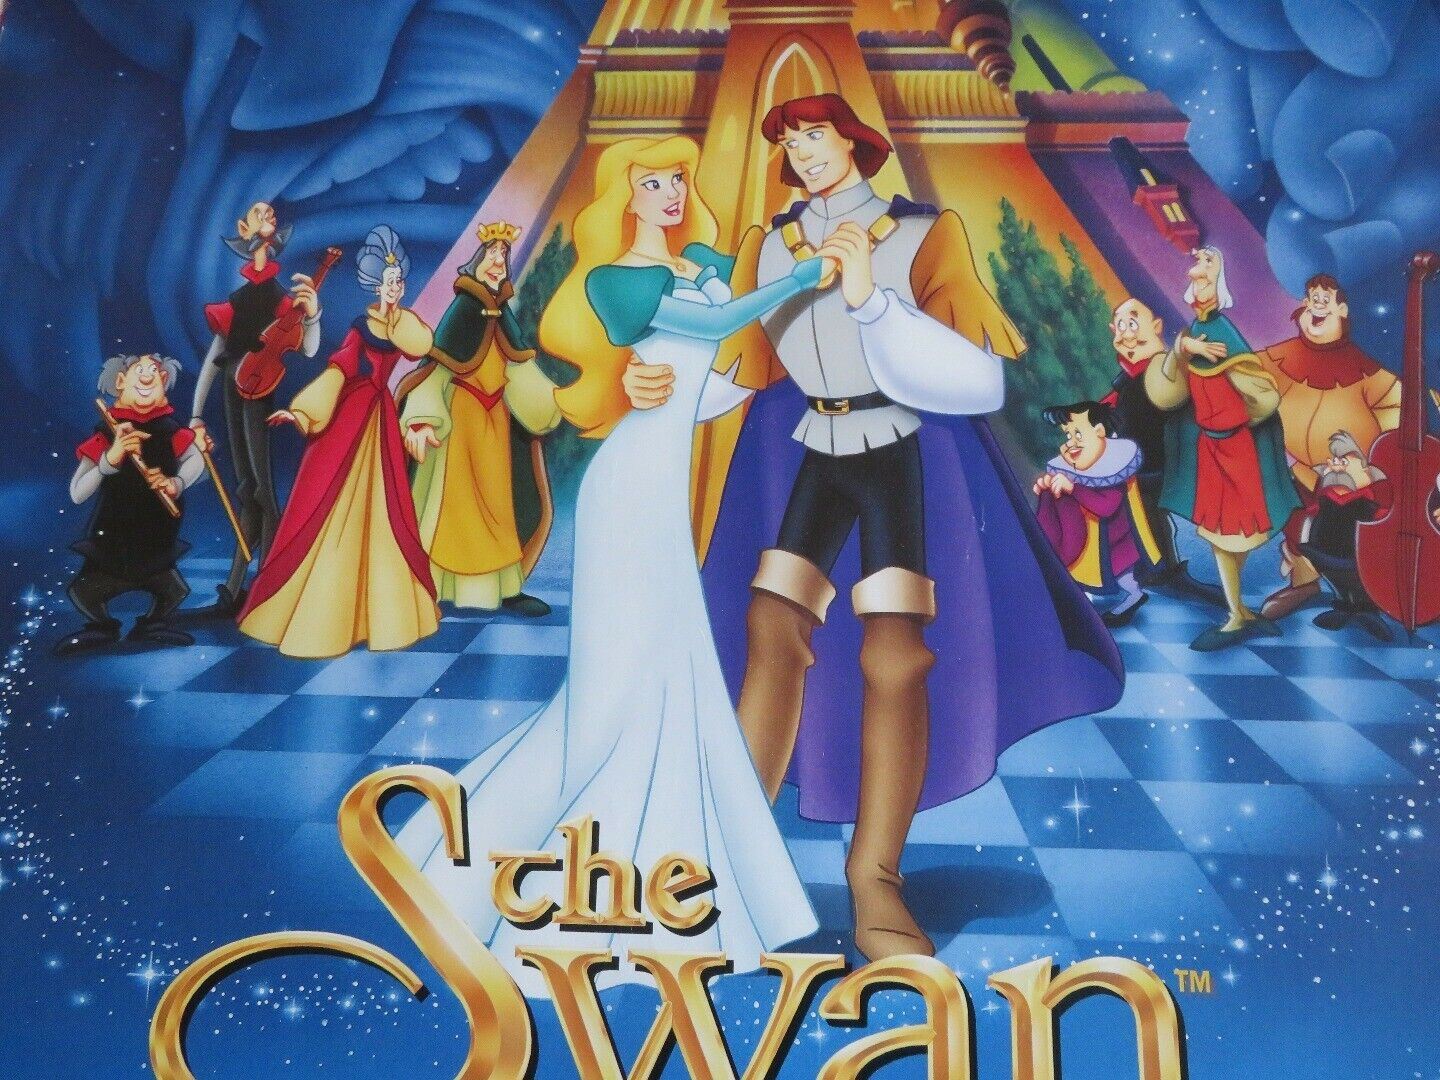 THE SWAN PRINCESS ONE SHEET ROLLED POSTER JOHN CLEESE  1994